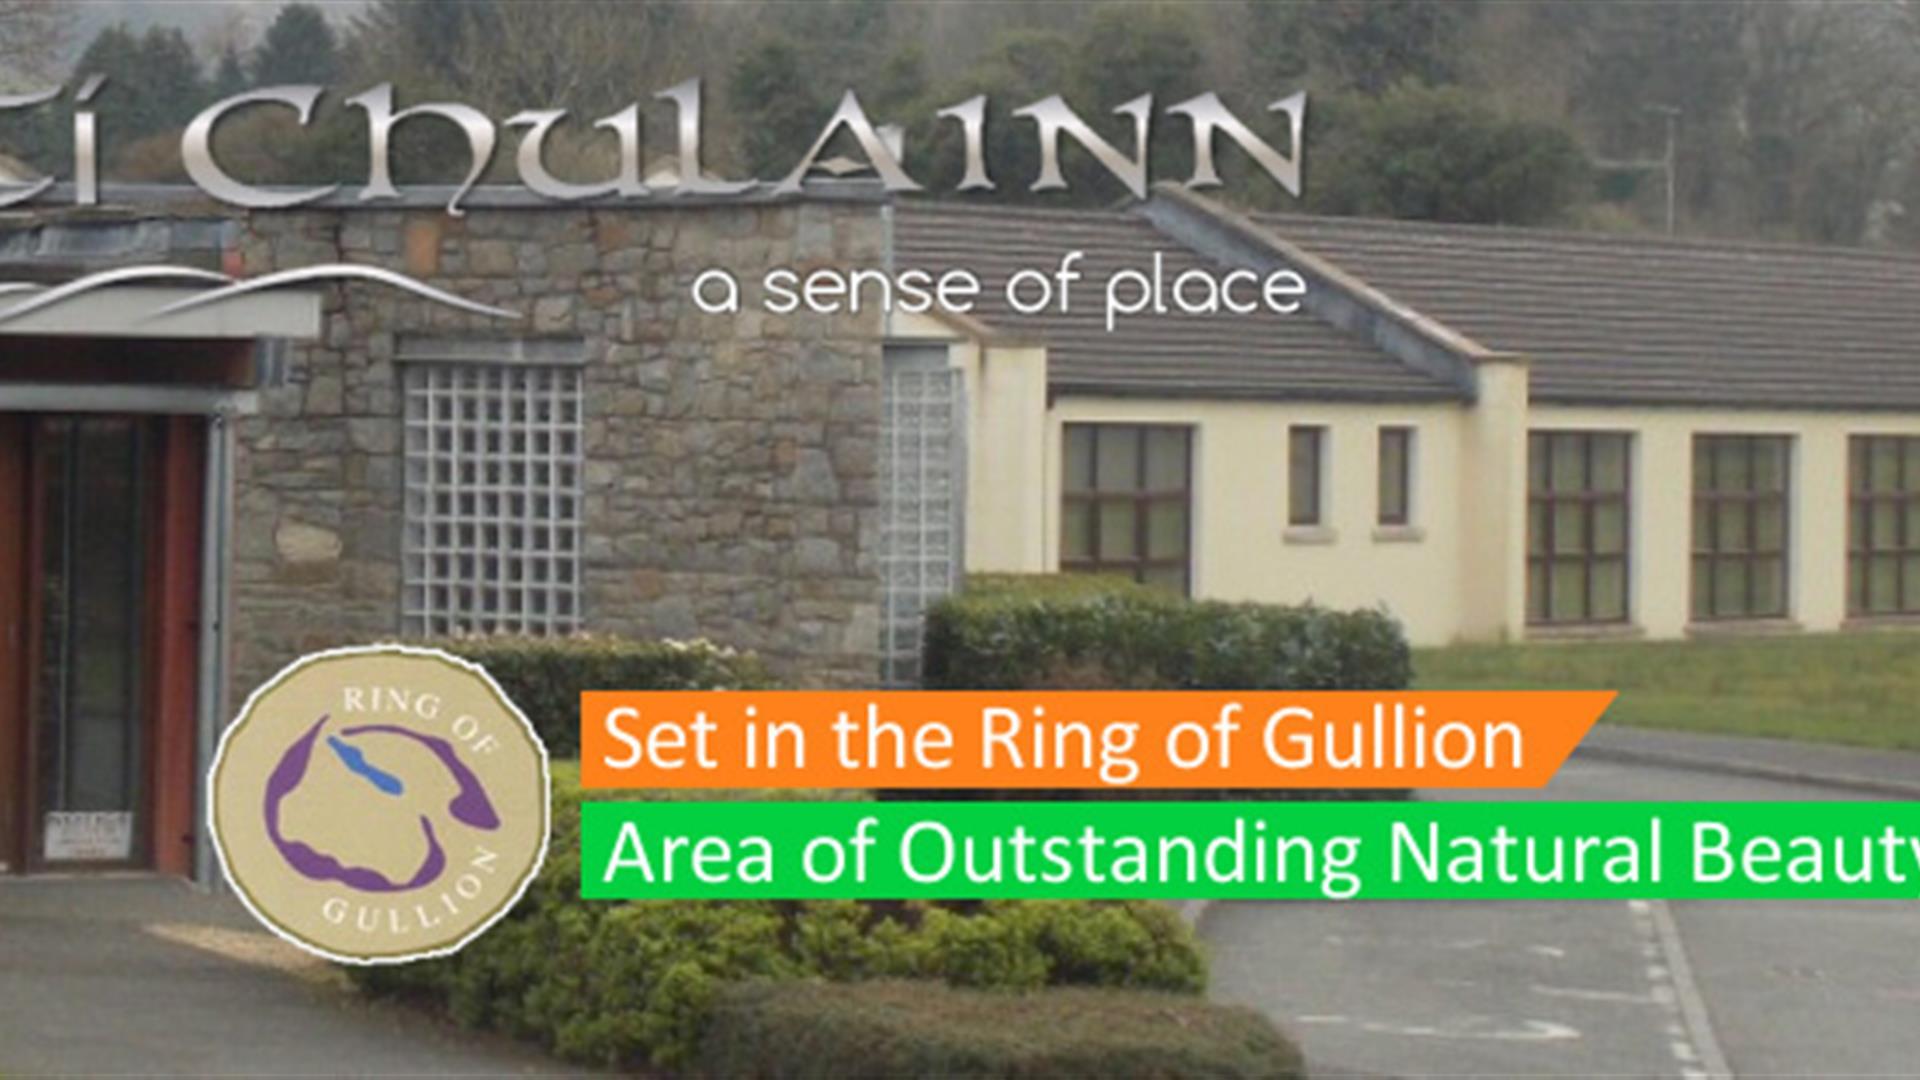 Ti Chulainn Cultural, Events and Accommodation Centre